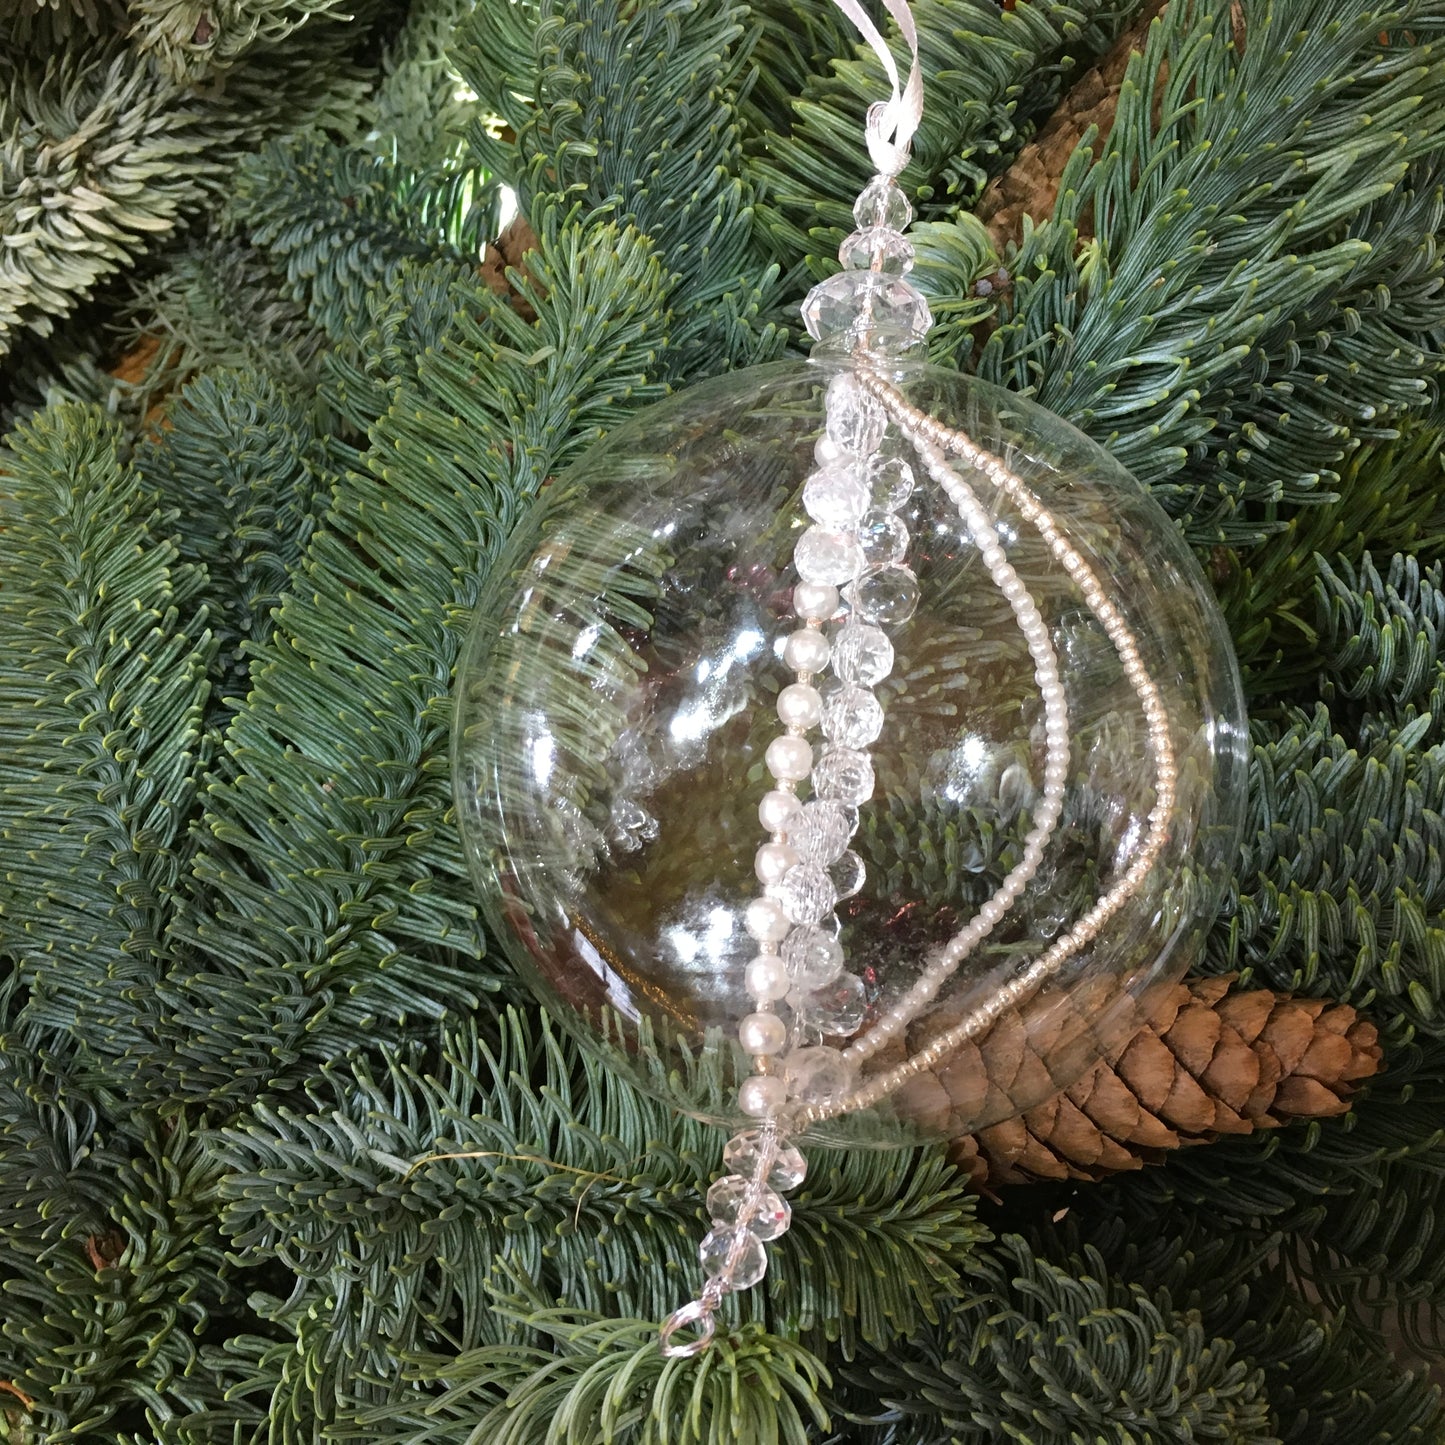 This flat sphere glass decoration is full of strings of clear, pearl and silver beads which sparkle on the Christmas tree